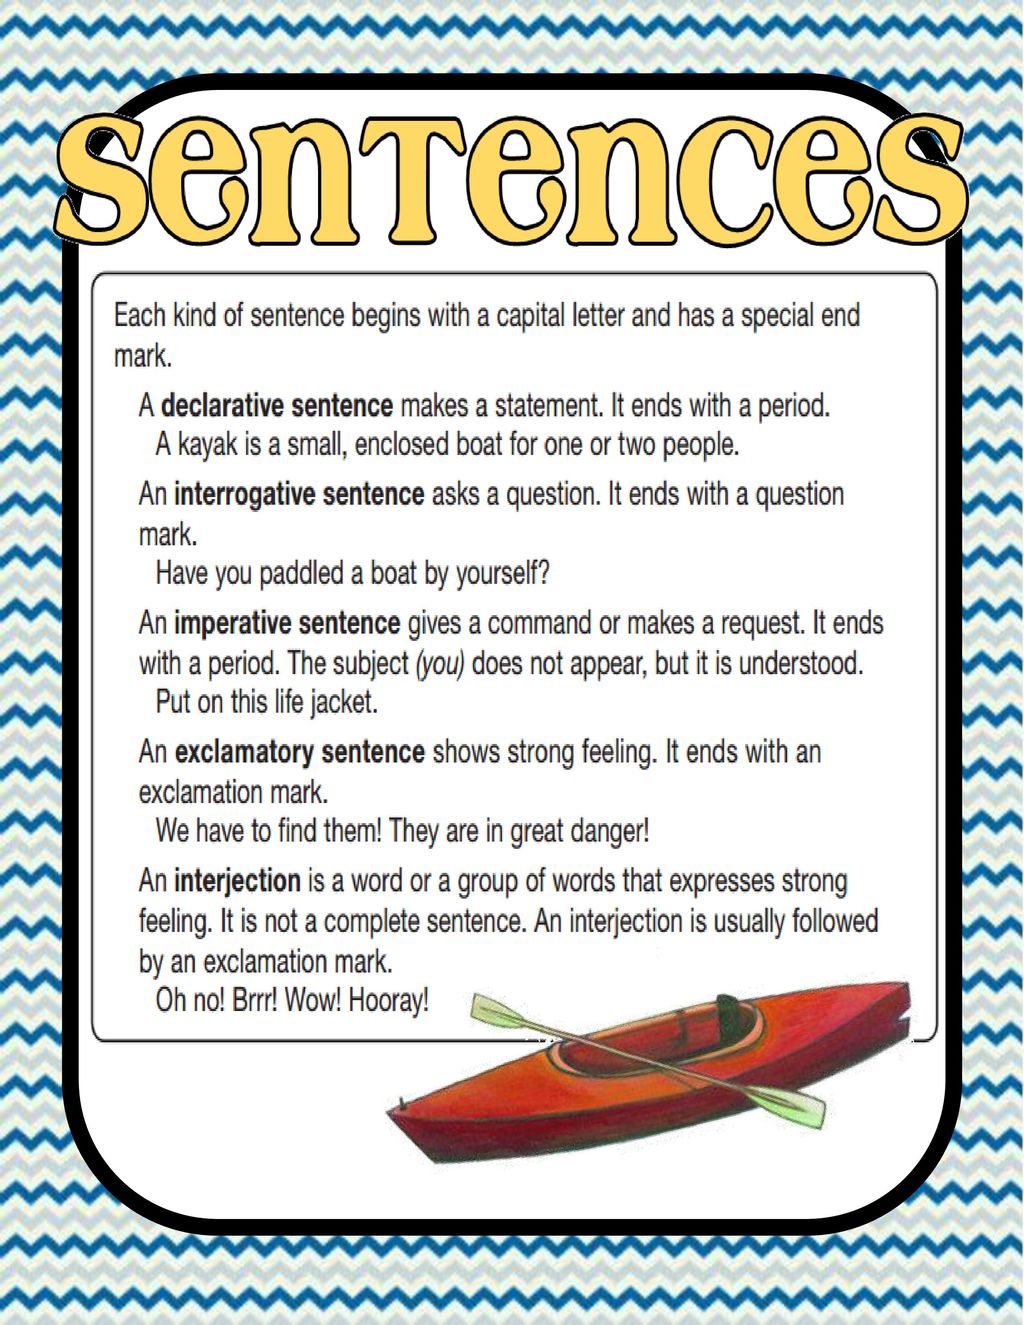 Let's do 1-3 together! Directions: Write D if the sentence is